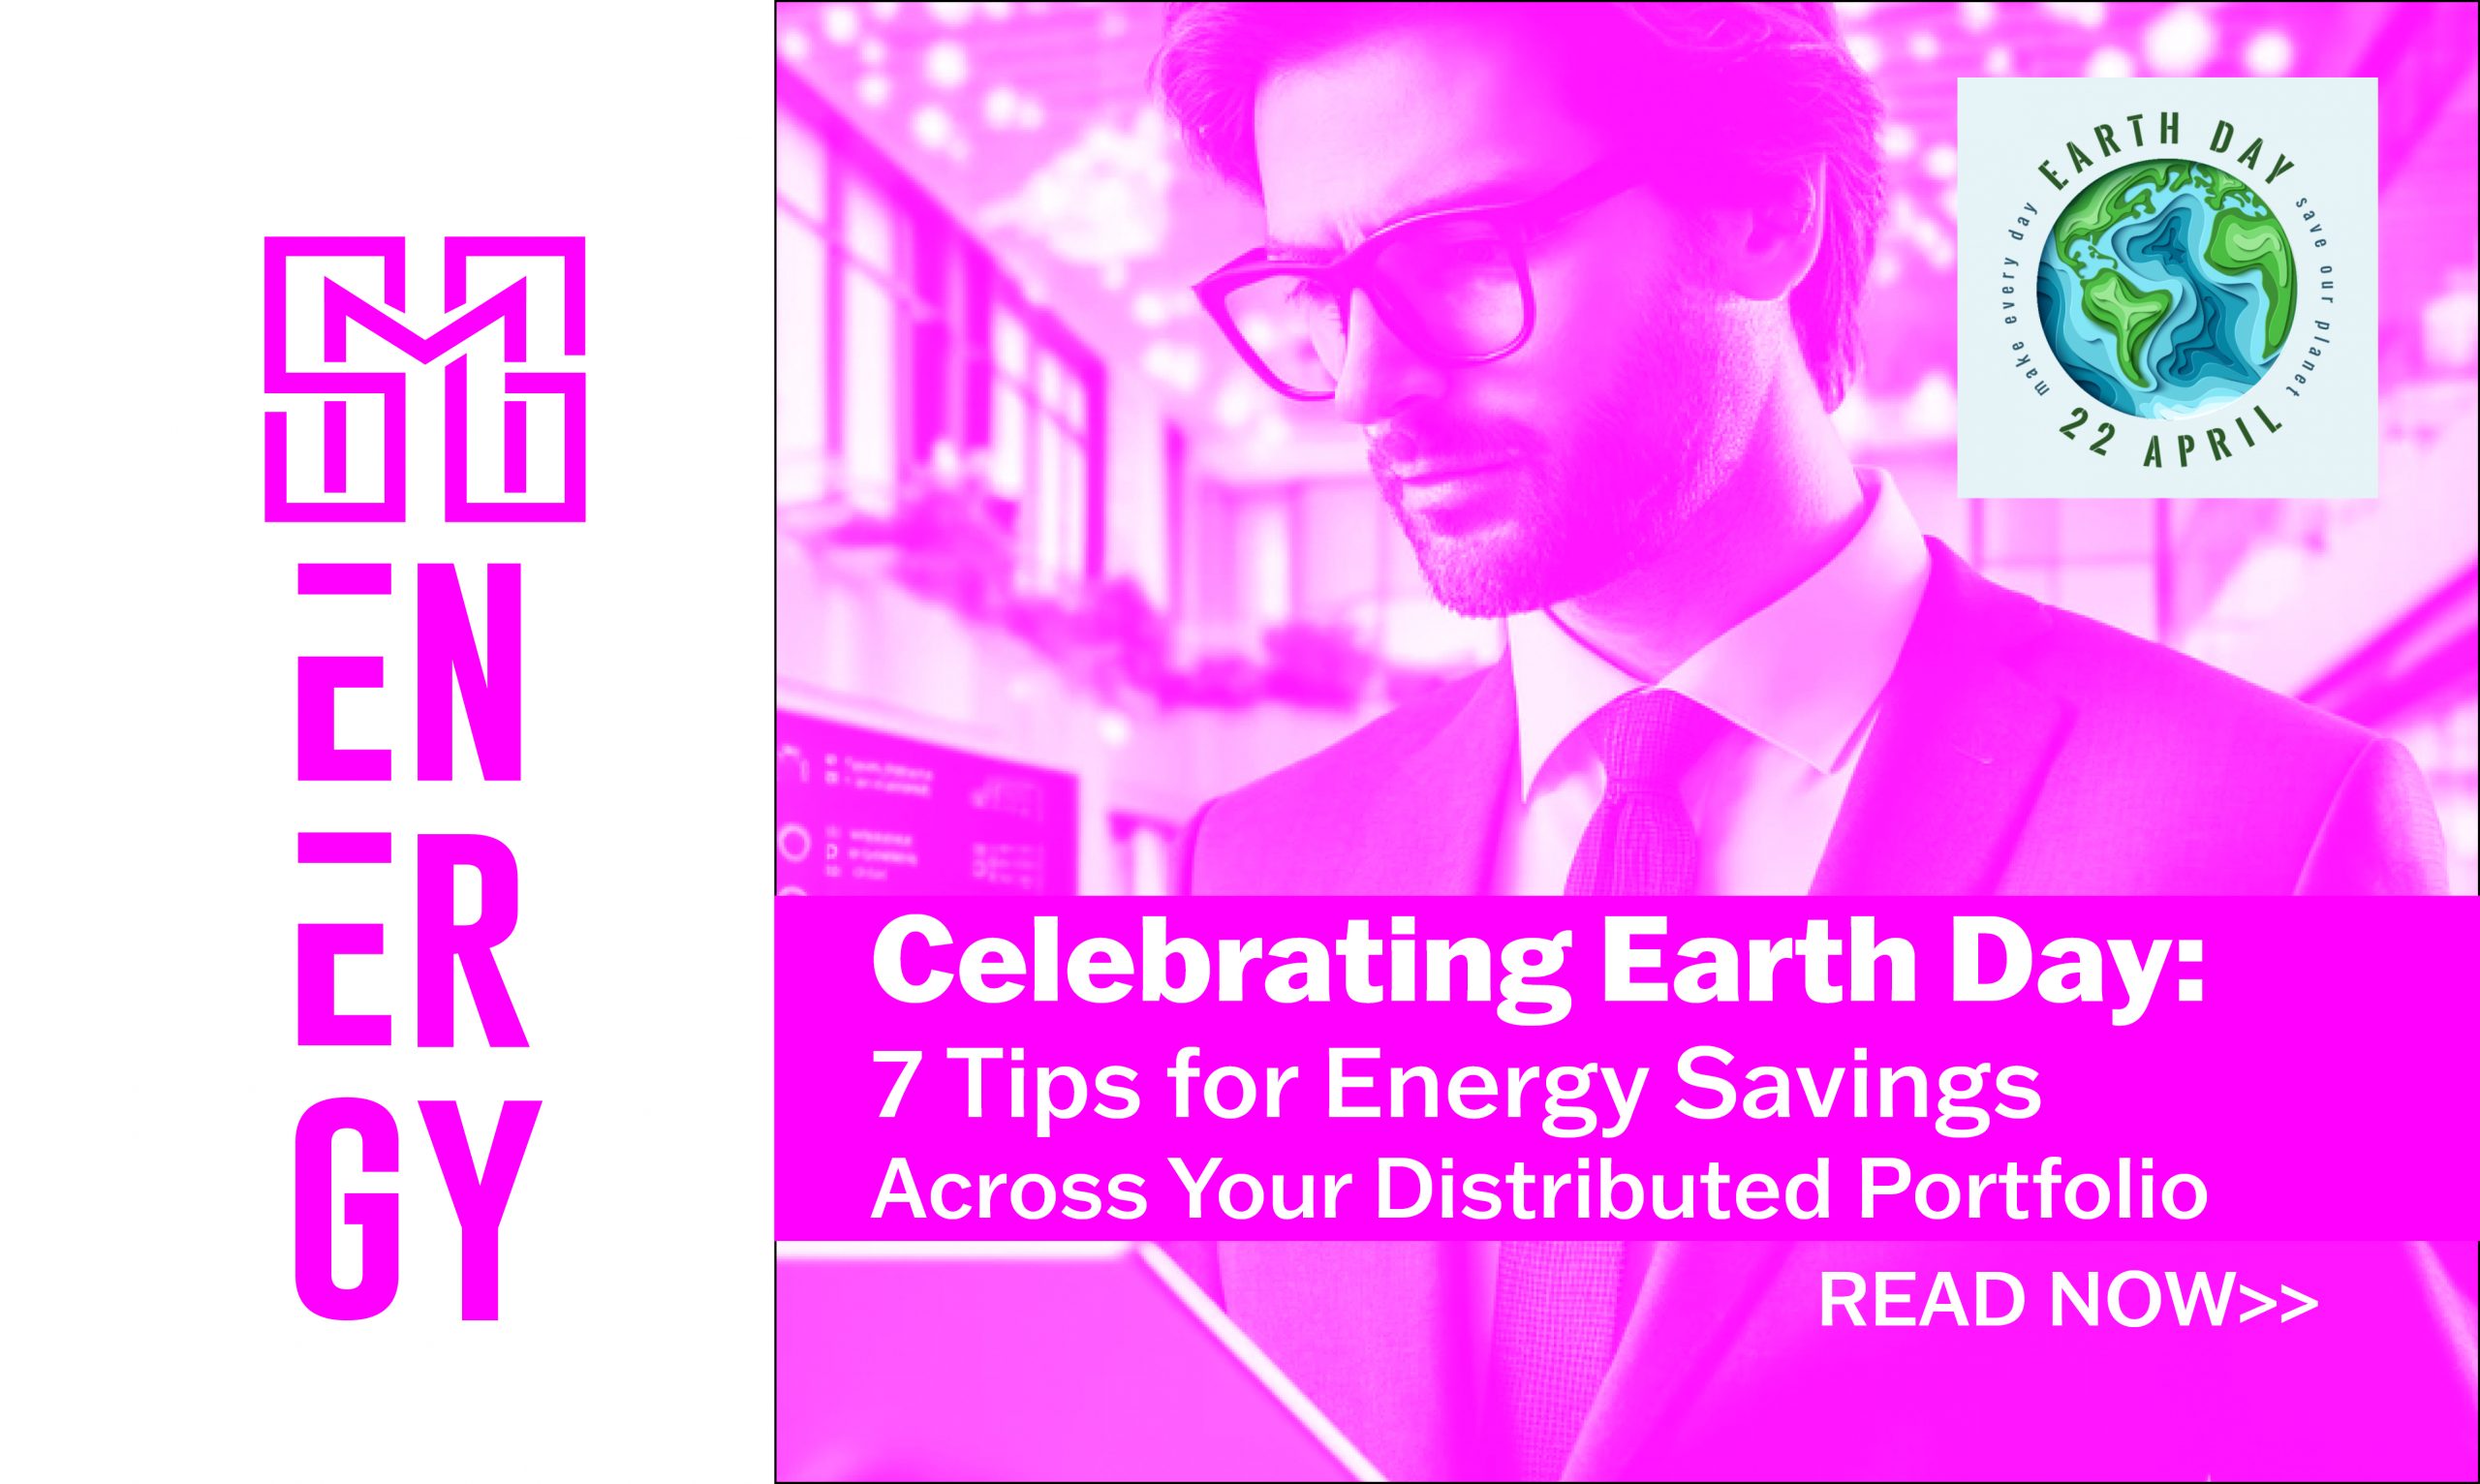 Celebrating Earth Day: 7 Tips for Energy Savings Across Your Distributed Portfolio 